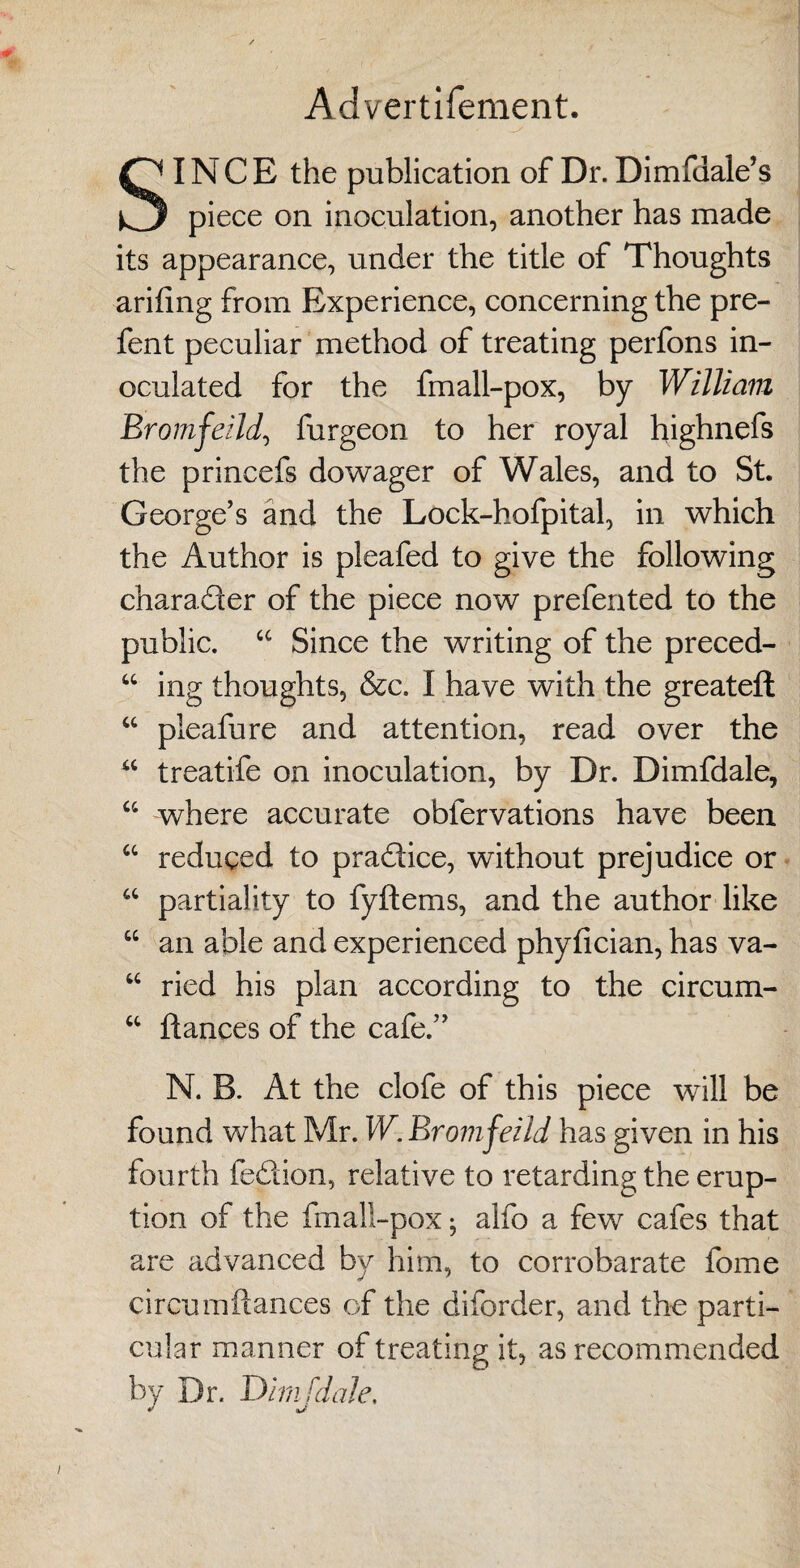 Advertifement. SINCE the publication of Dr. Dimfuale’s piece on inoculation, another has made its appearance, under the title of Thoughts arifing from Experience, concerning the pre- fent peculiar method of treating perfons in¬ oculated for the fmall-pox, by William Bromfeild, furgeon to her royal highnefs the princefs dowager of Wales, and to St. George’s and the Lock-hofpital, in which the Author is pleafed to give the following charader of the piece now prefented to the public. “ Since the writing of the preced- “ ing thoughts, &c. I have with the greateft “ pleafure and attention, read over the “ treatife on inoculation, by Dr. Dimfdale, “ where accurate oblervations have been “ reduced to pradice, without prejudice or a partiality to fyftems, and the author like “ an able and experienced phyfician, has va- “ ried his plan according to the circum- “ dances of the cafe.” N. B. At the clofe of this piece will be found what Mr. W. Bromfeild has given in his fourth fedion, relative to retarding the erup¬ tion of the fmall-pox; alfo a few cafes that are advanced by him, to corrobarate fome circumftances of the diforder, and the parti¬ cular manner of treating it, as recommended by Dr. Dimfdale.